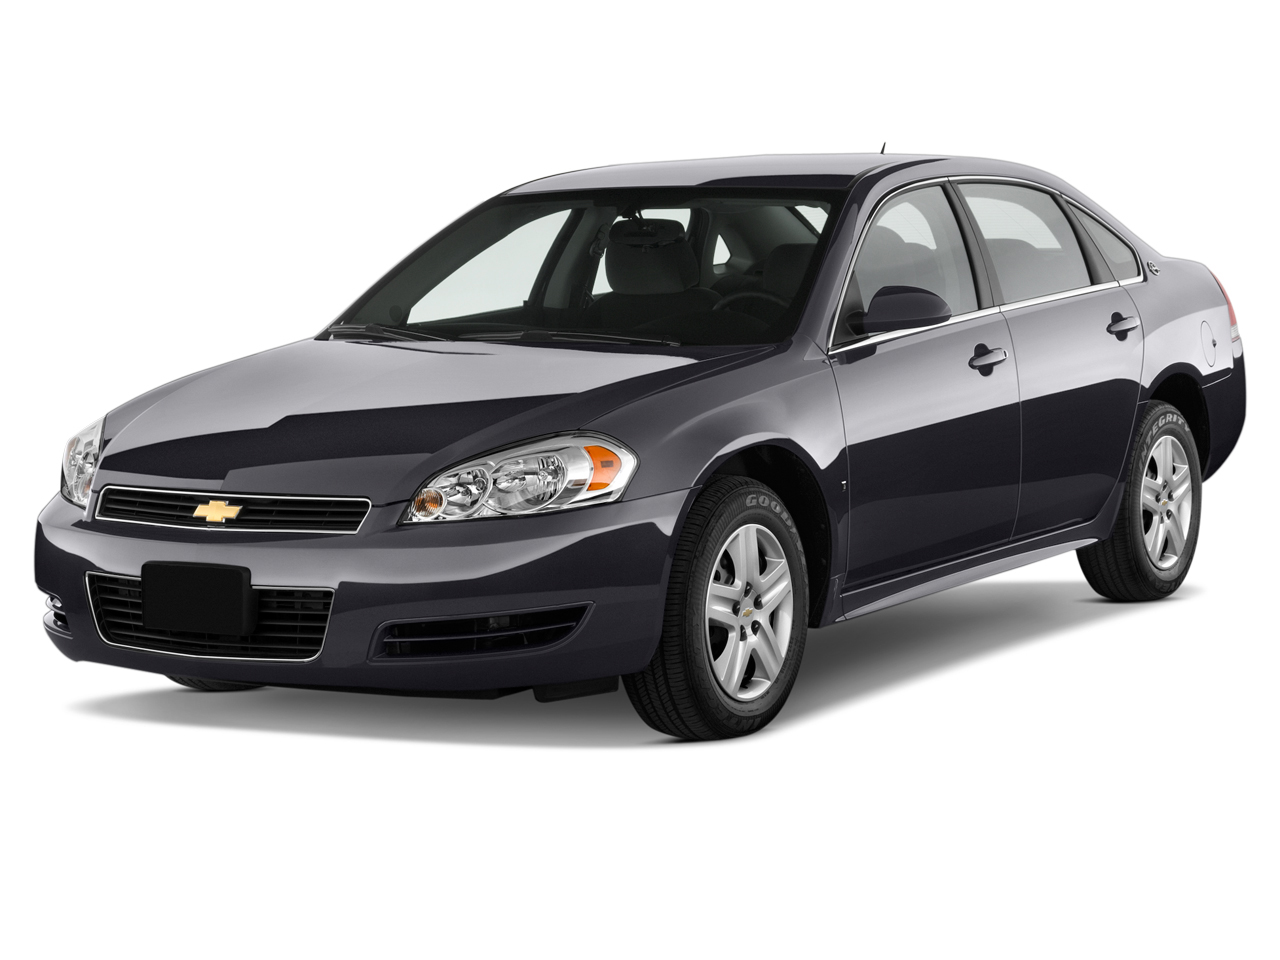 2012 Chevrolet Impala Prices And Expert Review The Car